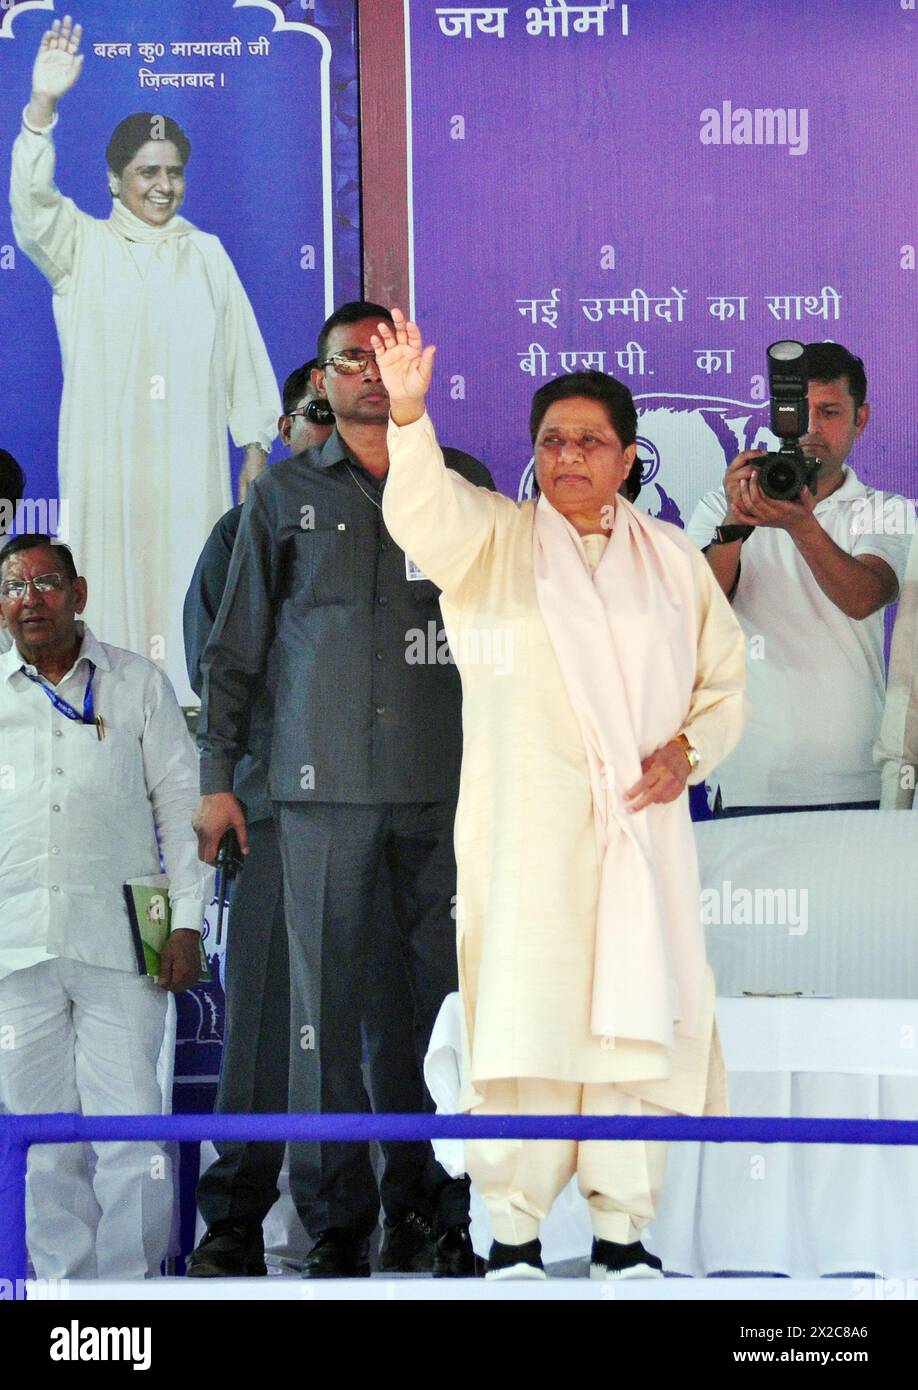 GHAZIABAD, INDIA - APRIL 21: Bahujan Samaj Party's national president Mayawati greeting the people after addressing an election rally at Kavi Nagar Ramlila Ground, on April 21, 2024 in Ghaziabad, India. She said that if electronic voting machines (EVMs) are not tampered with, it will be 'difficult' for the ruling BJP to win the Lok Sabha polls this time. She also hit out at the BJP, saying 'due to the casteist, capitalist and communal policies of the BJP', the party will have to face a tough fight in this parliamentary election. (Photo by Sakib Ali/Hindustan Times/Sipa USA ) Stock Photo